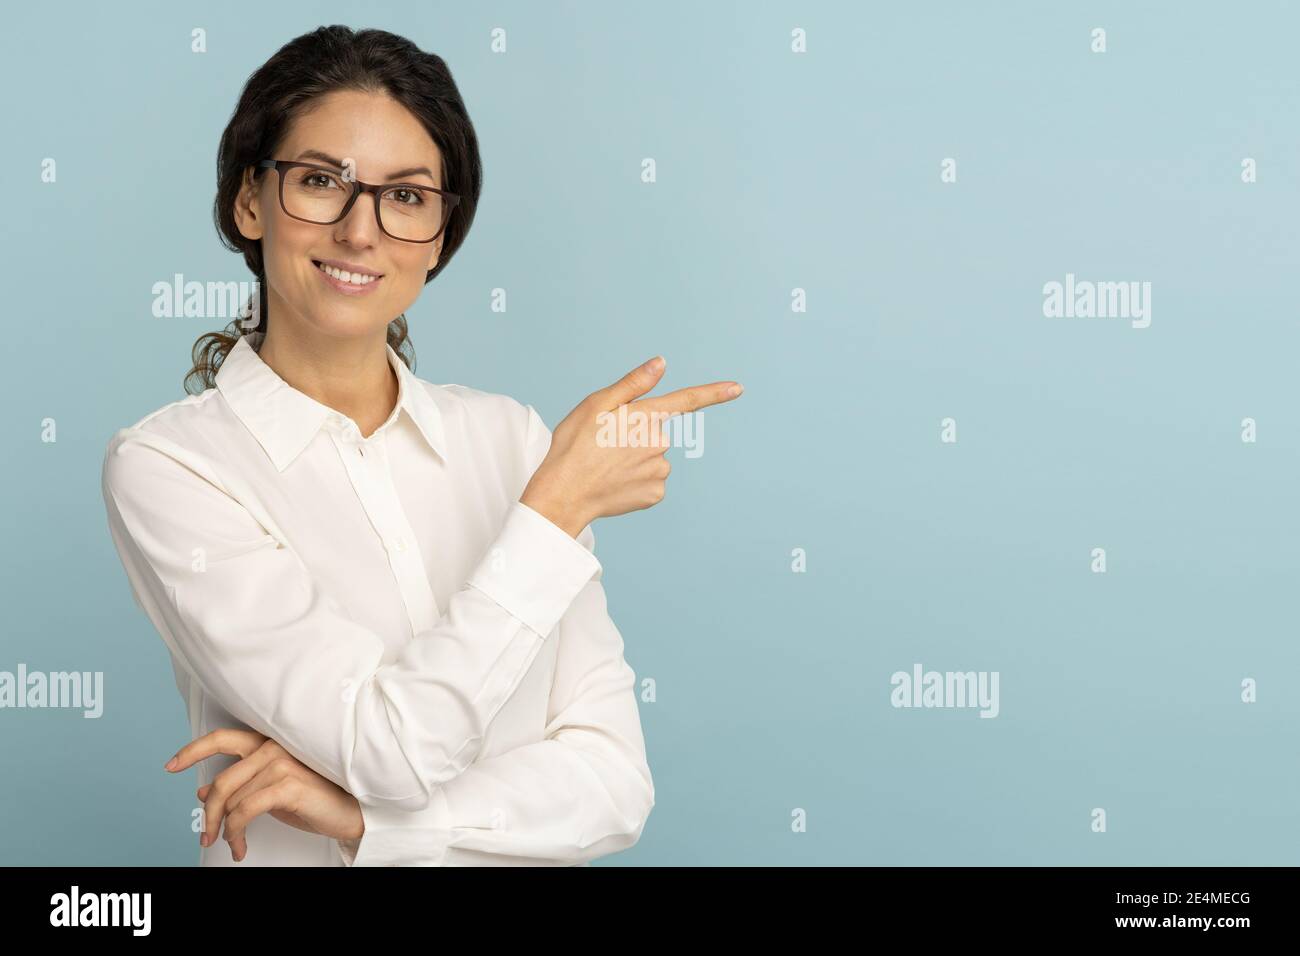 Smiling business woman wear white blouse and glasses pointing with finger, showing at copy space Stock Photo